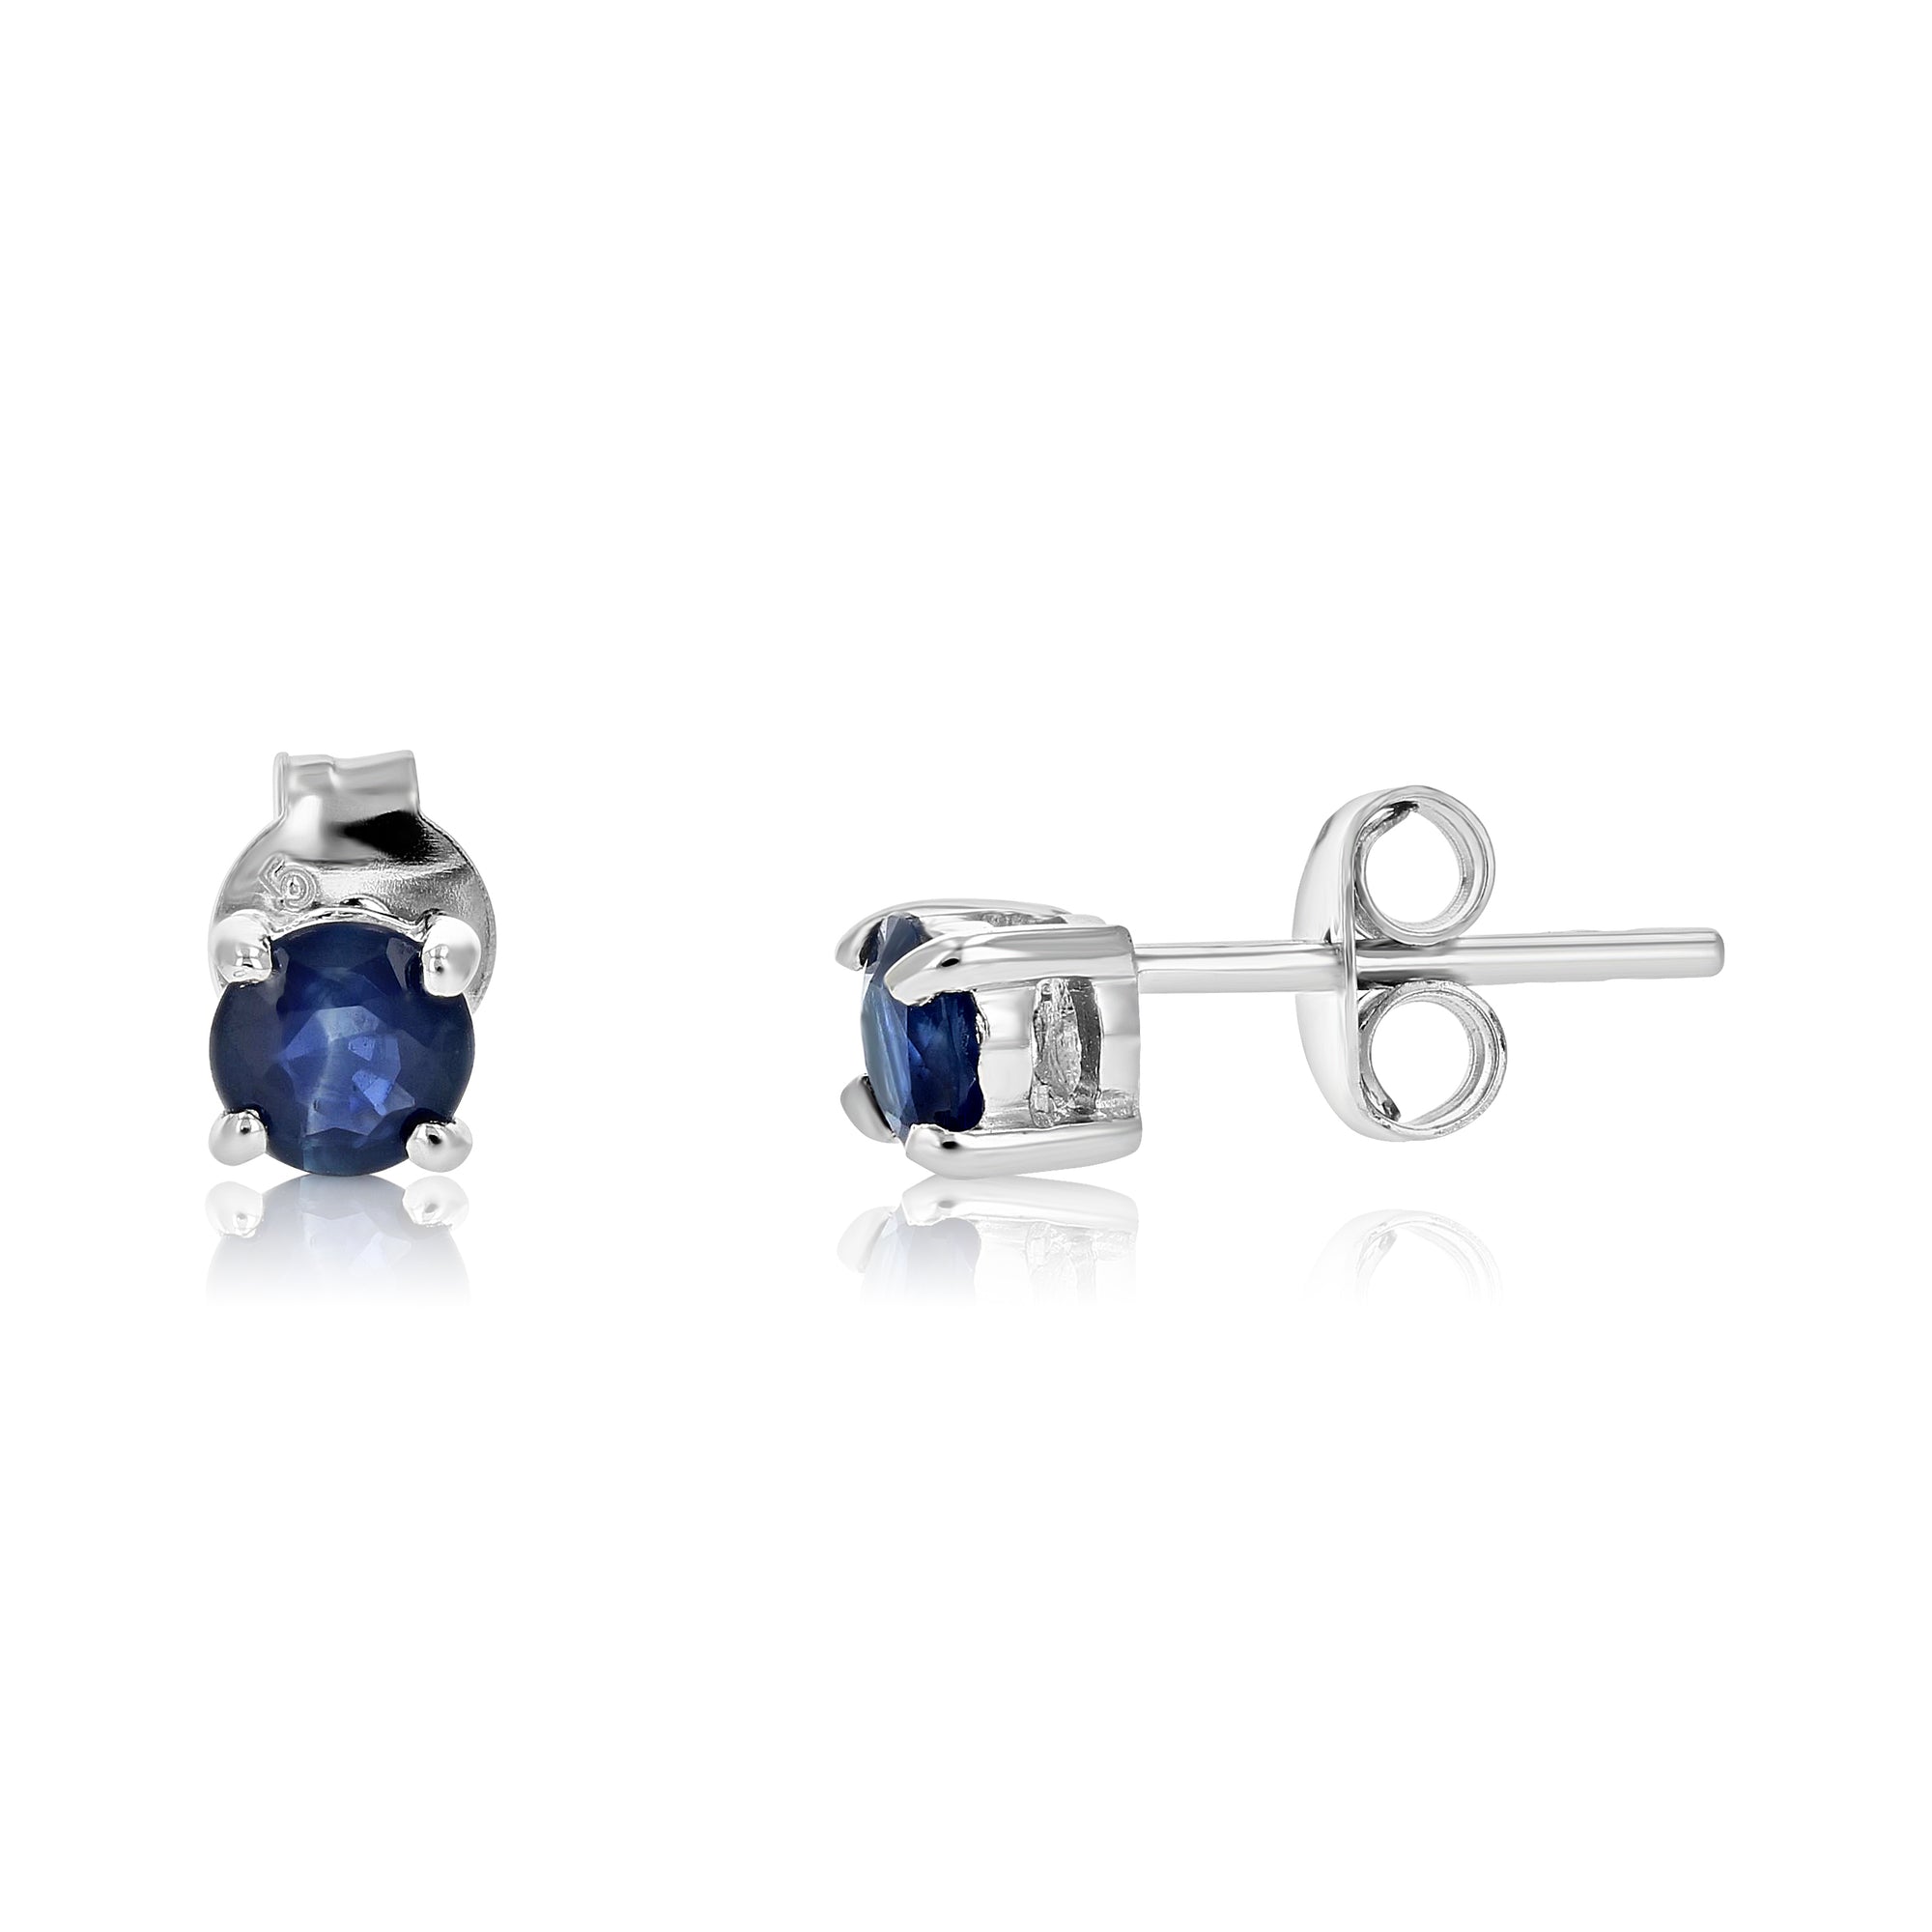 1/3 cttw Round Blue Sapphire Stud Earrings in .925 Sterling Silver with Rhodium